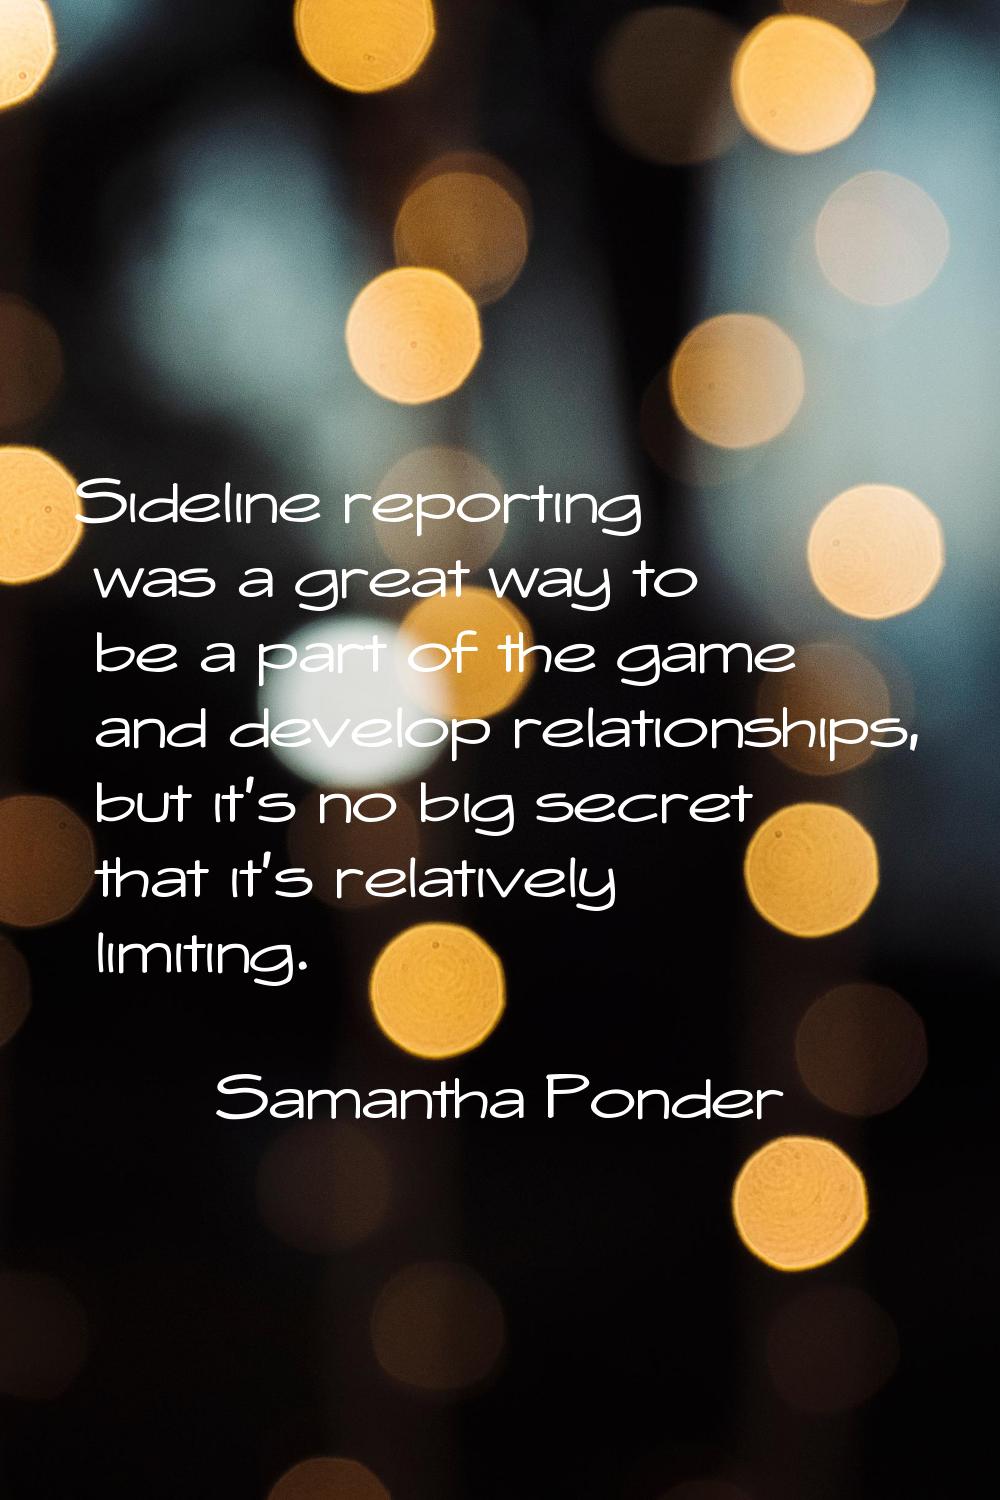 Sideline reporting was a great way to be a part of the game and develop relationships, but it's no 